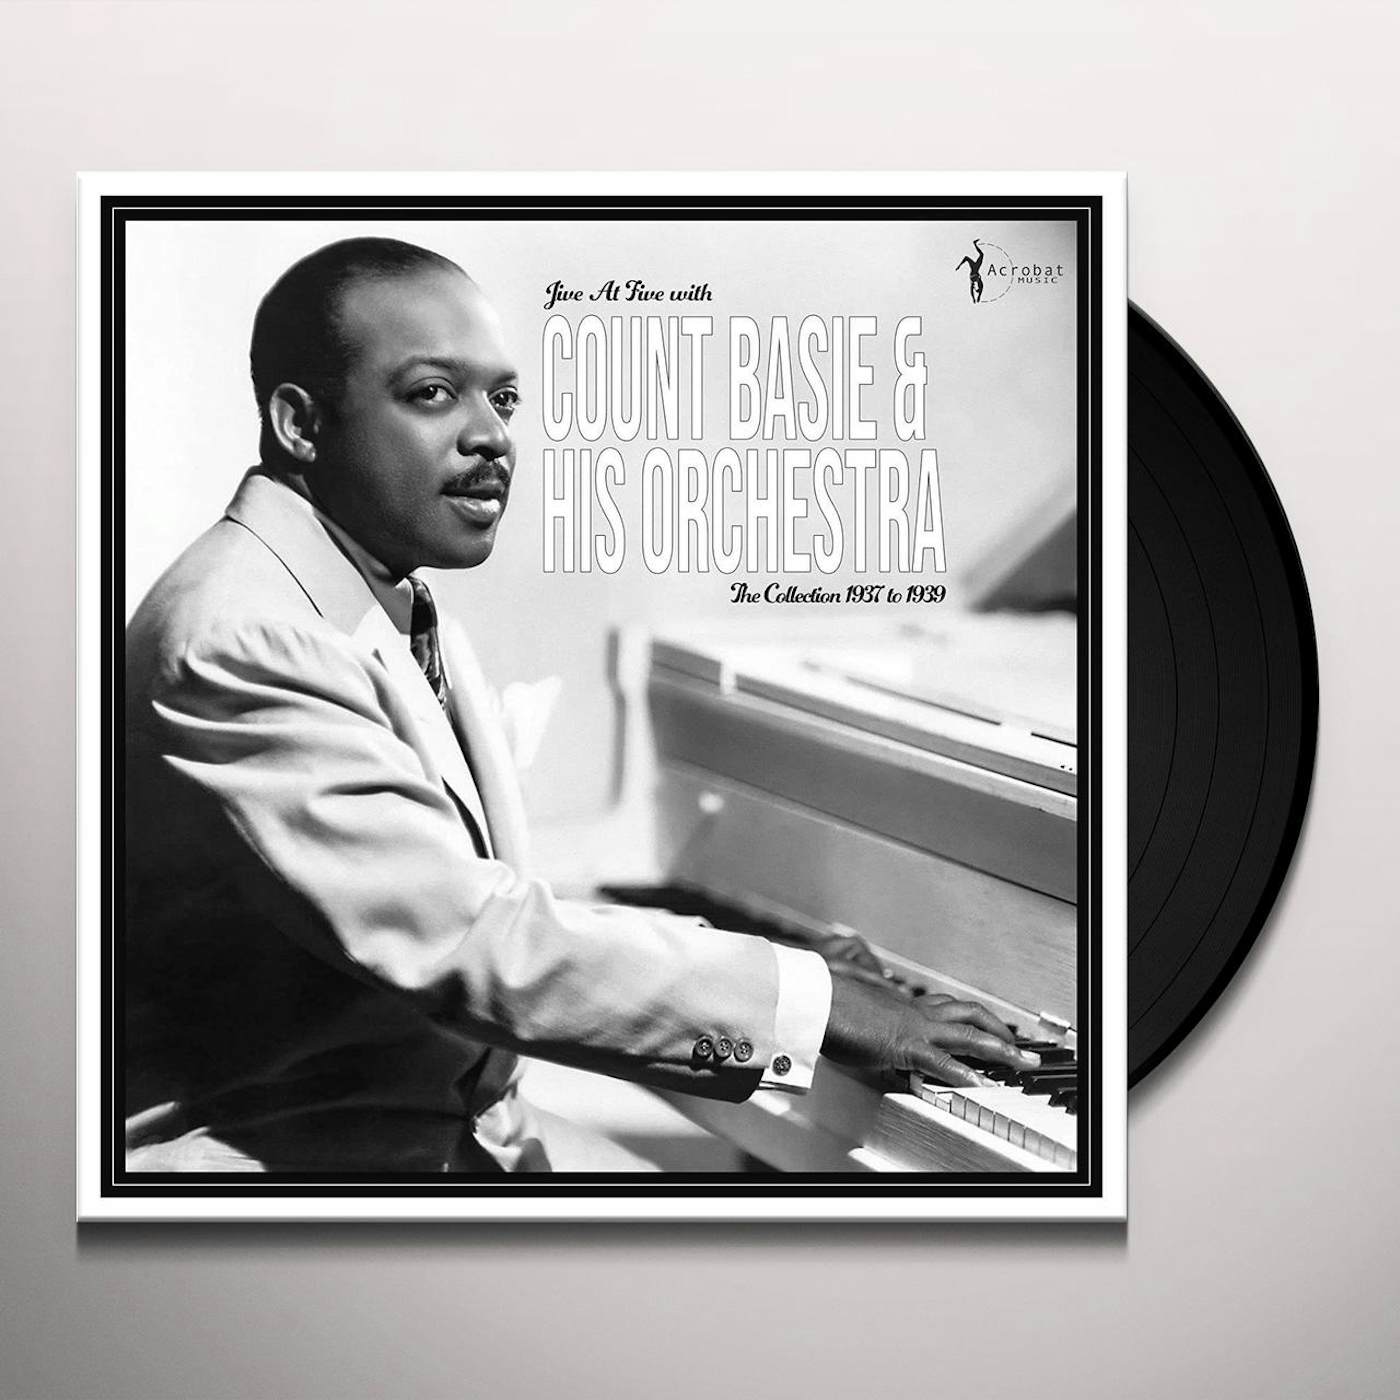 Count Basie Jive At Five: The Collection 1937-1939 Vinyl Record